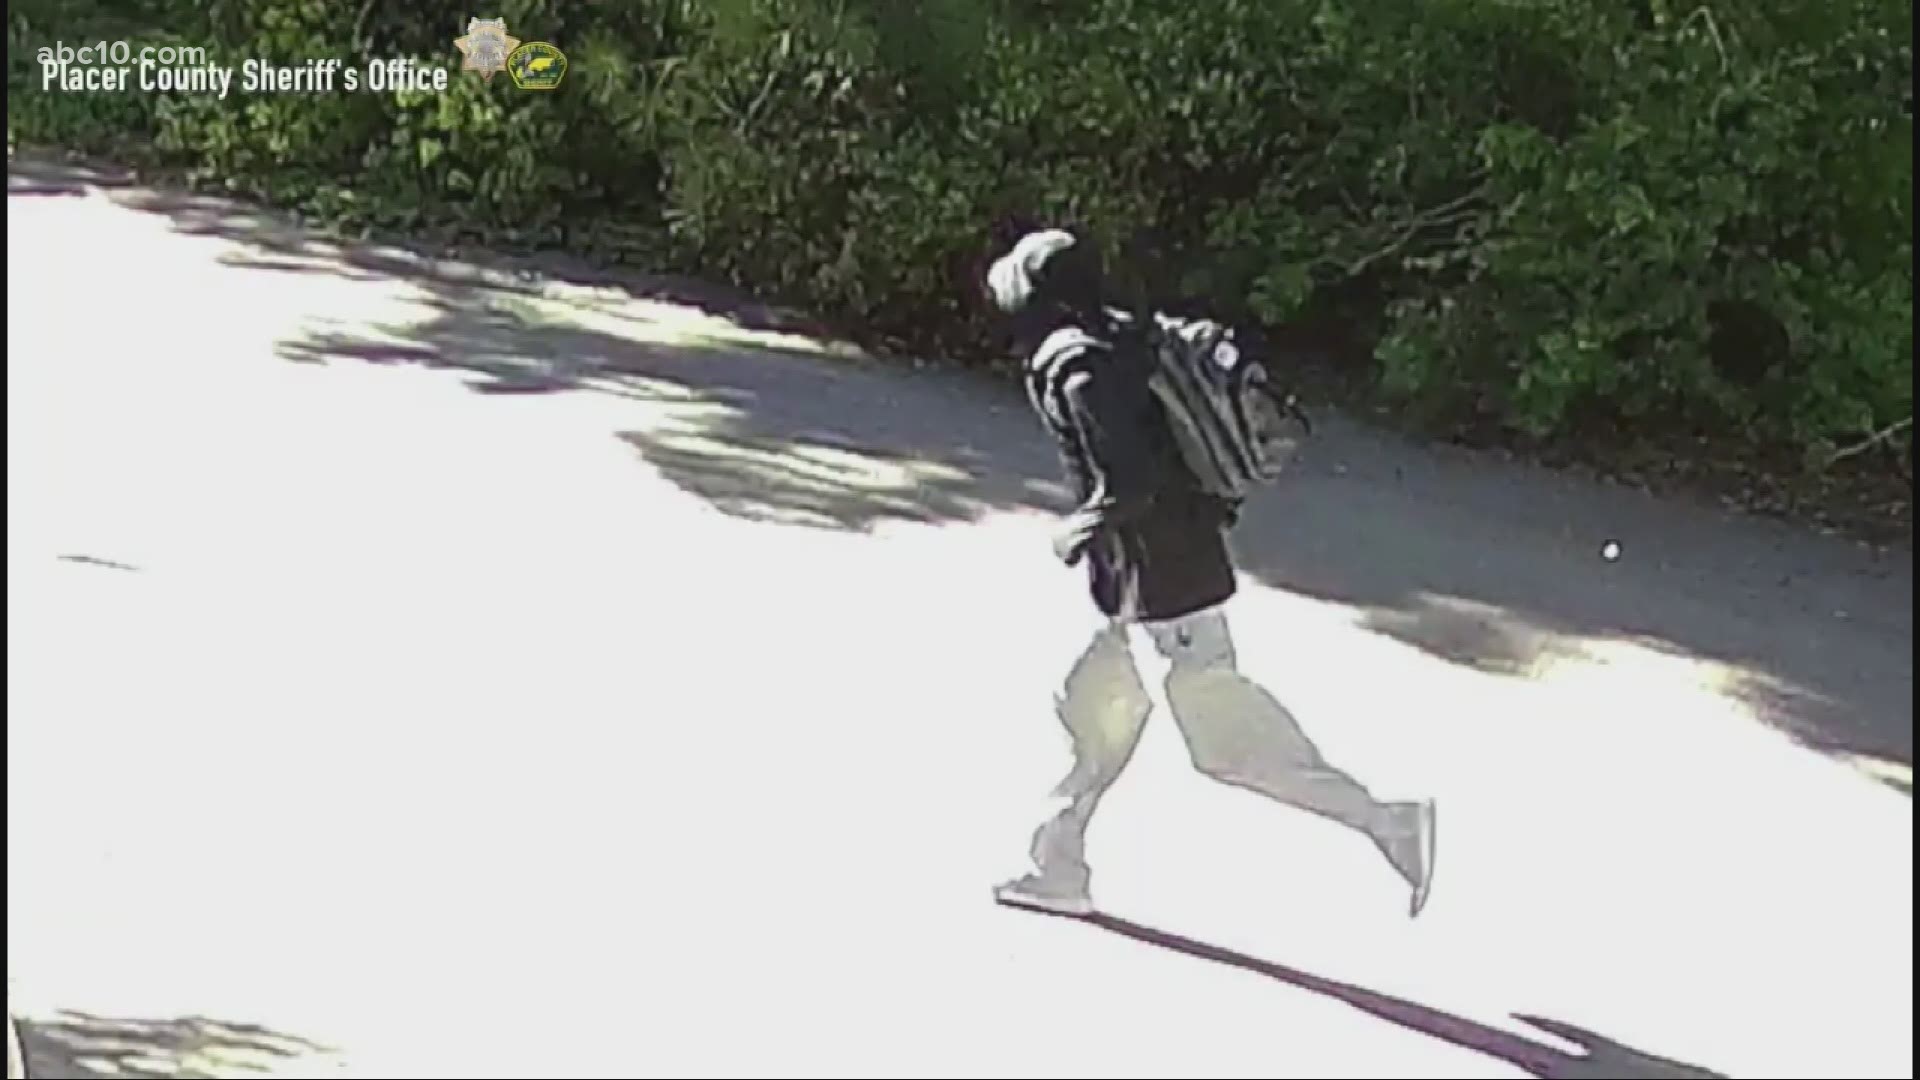 The Placer County Sheriff's Office is asking for the public's help identifying a person of interest in the shooting death of a 70-year-old man.